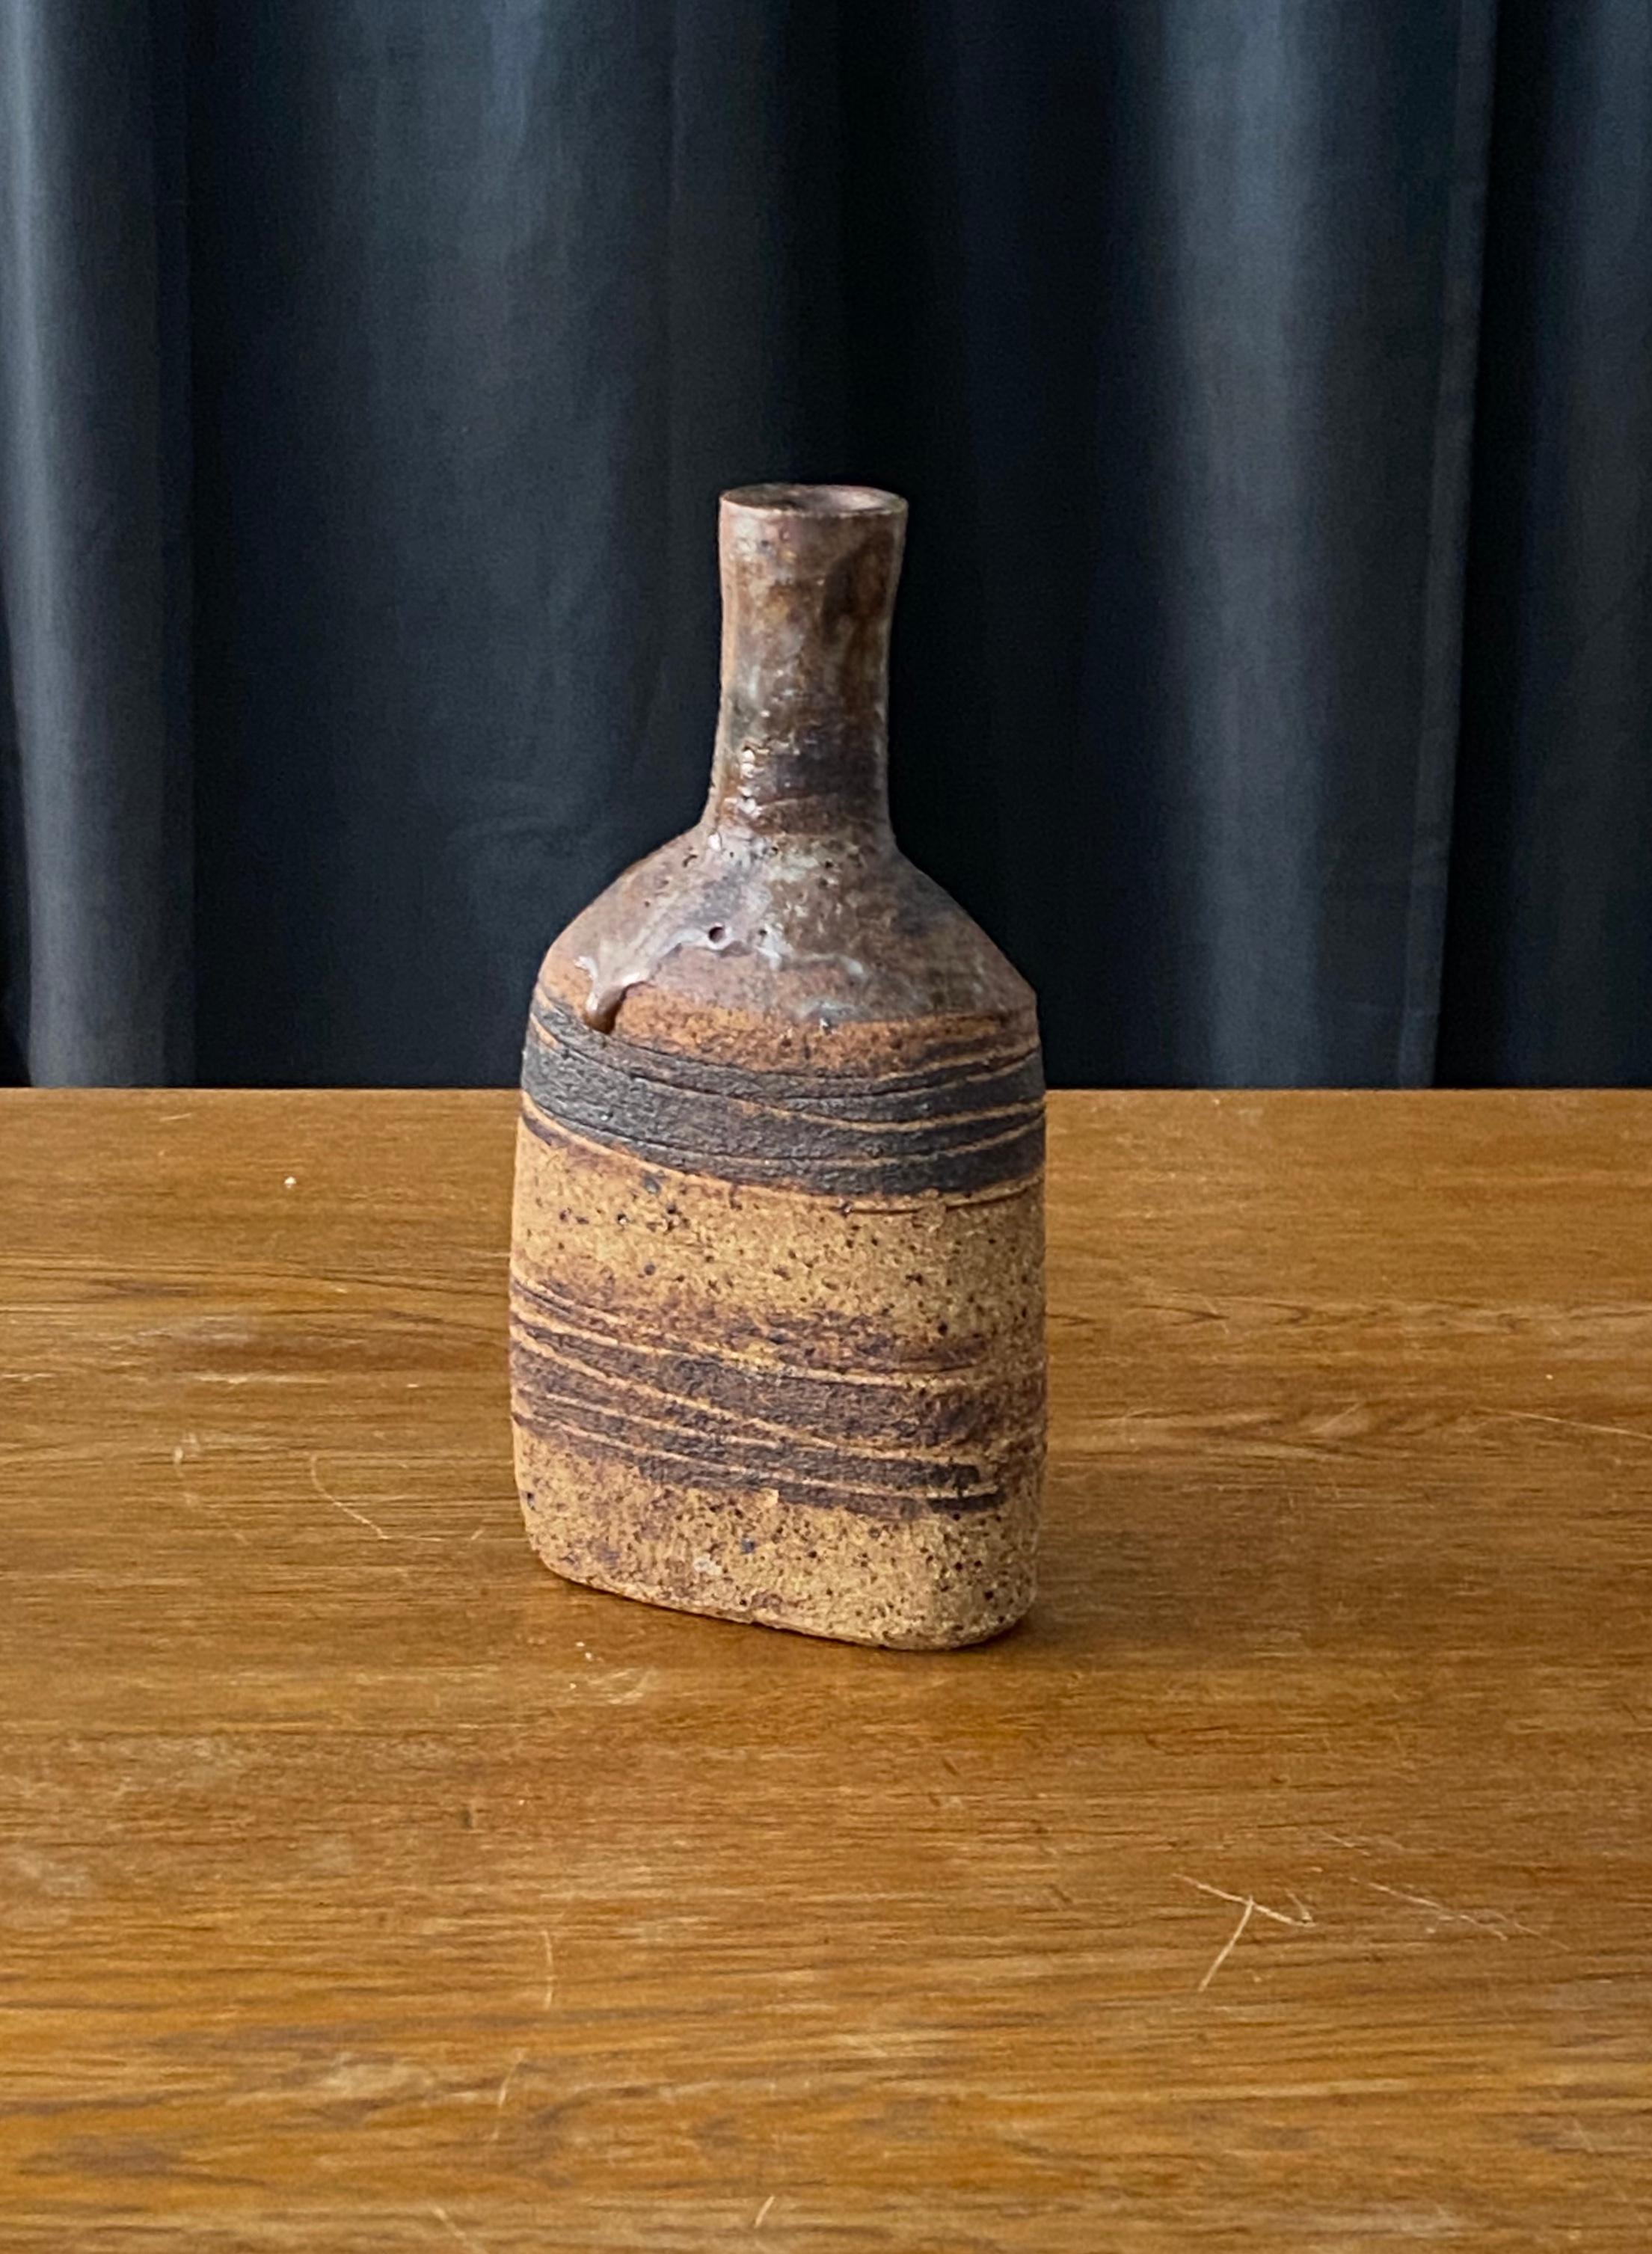 A small handmade vase or vessel. Designed and produced by Tue Poulsen, Denmark, 1960s. 

Other ceramicists of the period include Axel Salto, Arne Bang, Wilhelm Kåge, and Berndt Friberg.